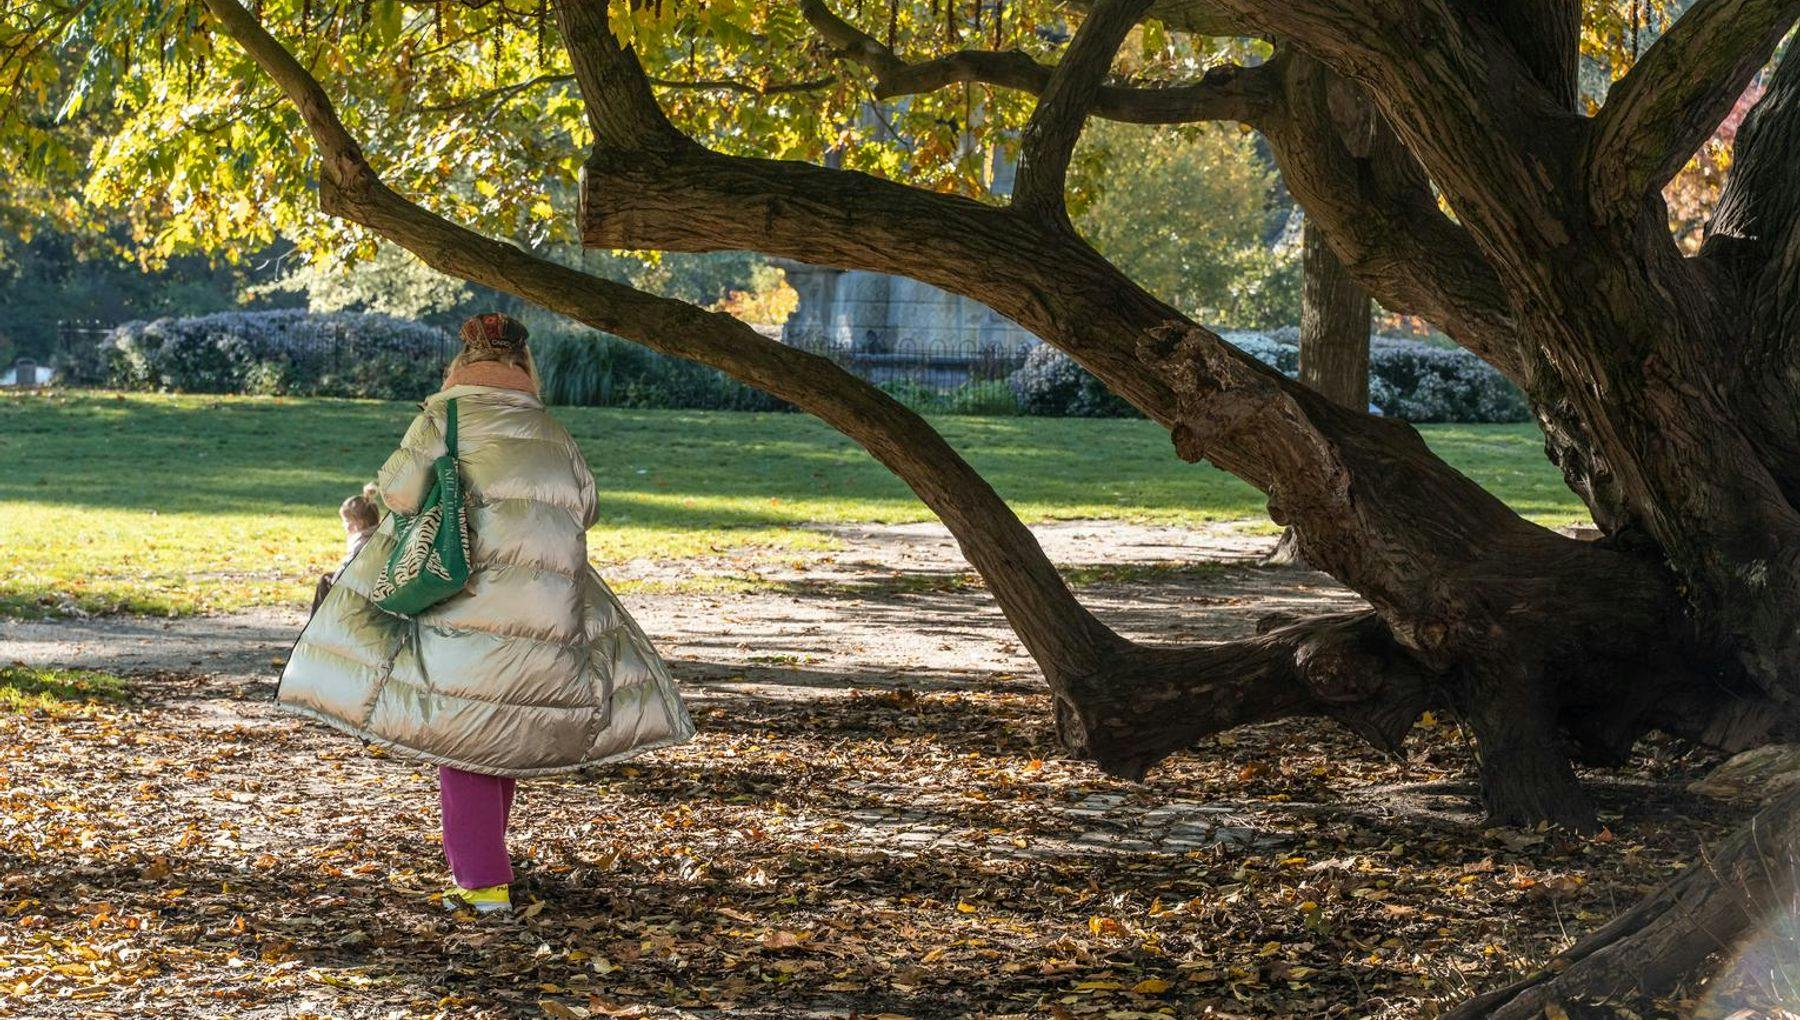 A person walking through the Sarphatipark on a sunny autumn day.